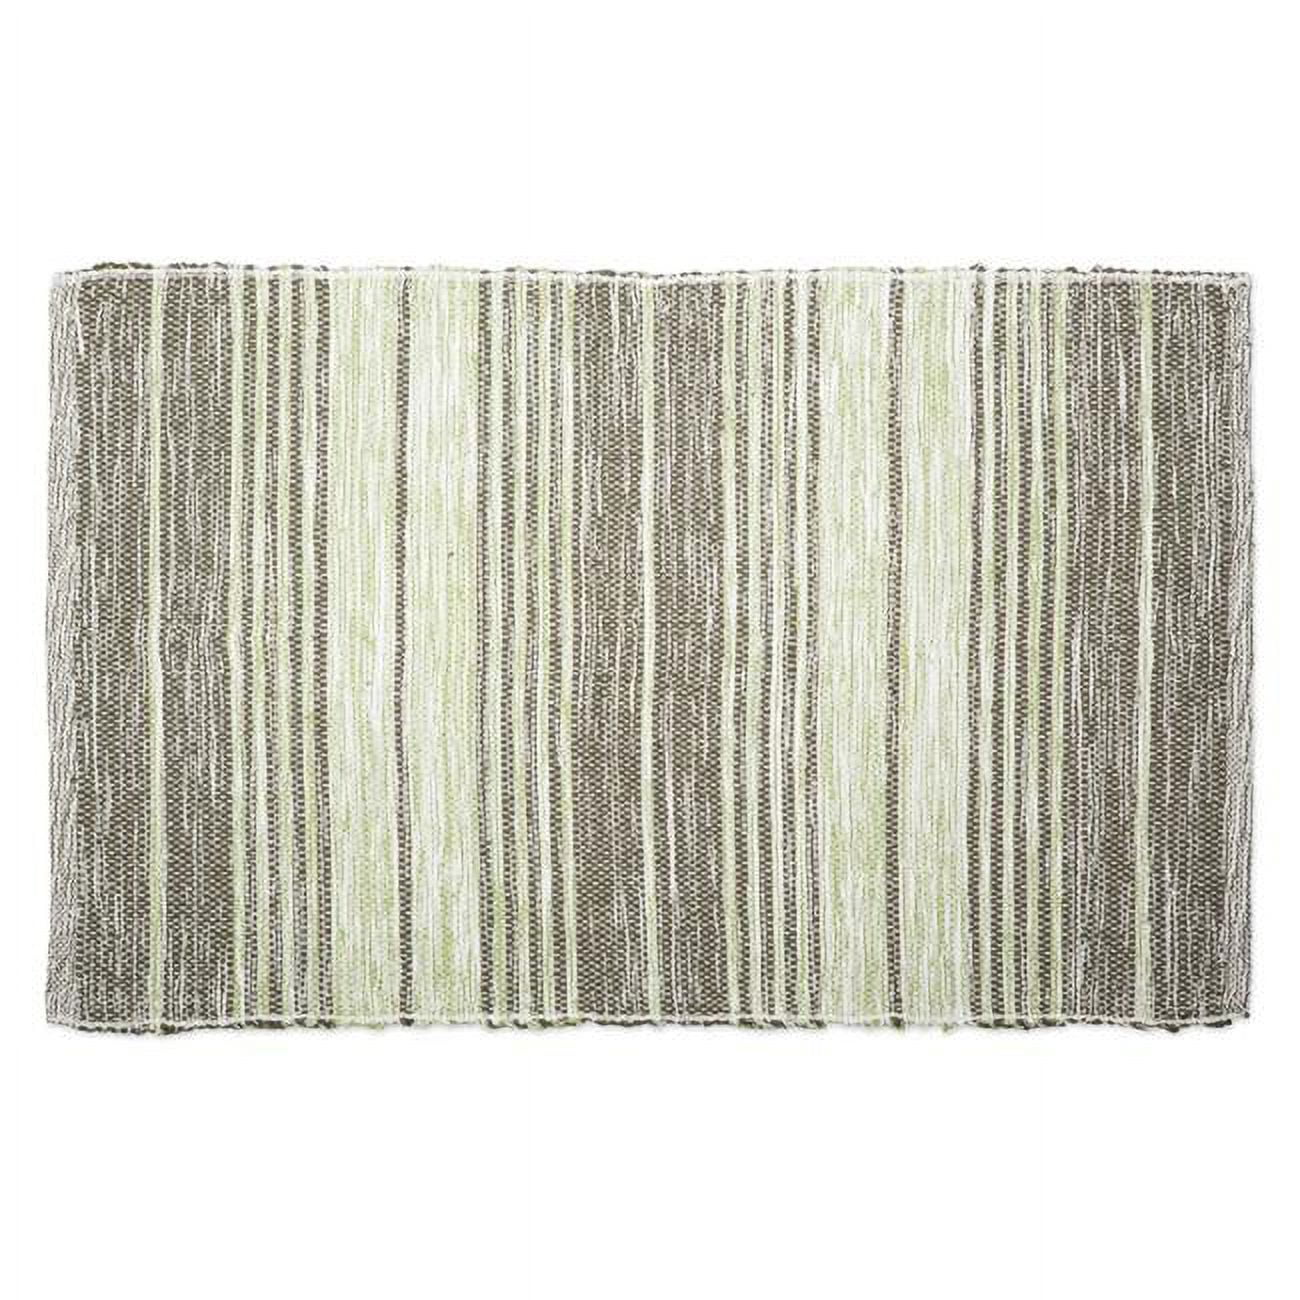 Design Imports Camz11092 Variegated Artichoke Recycled Yarn Rug, 2 X 3 Ft.